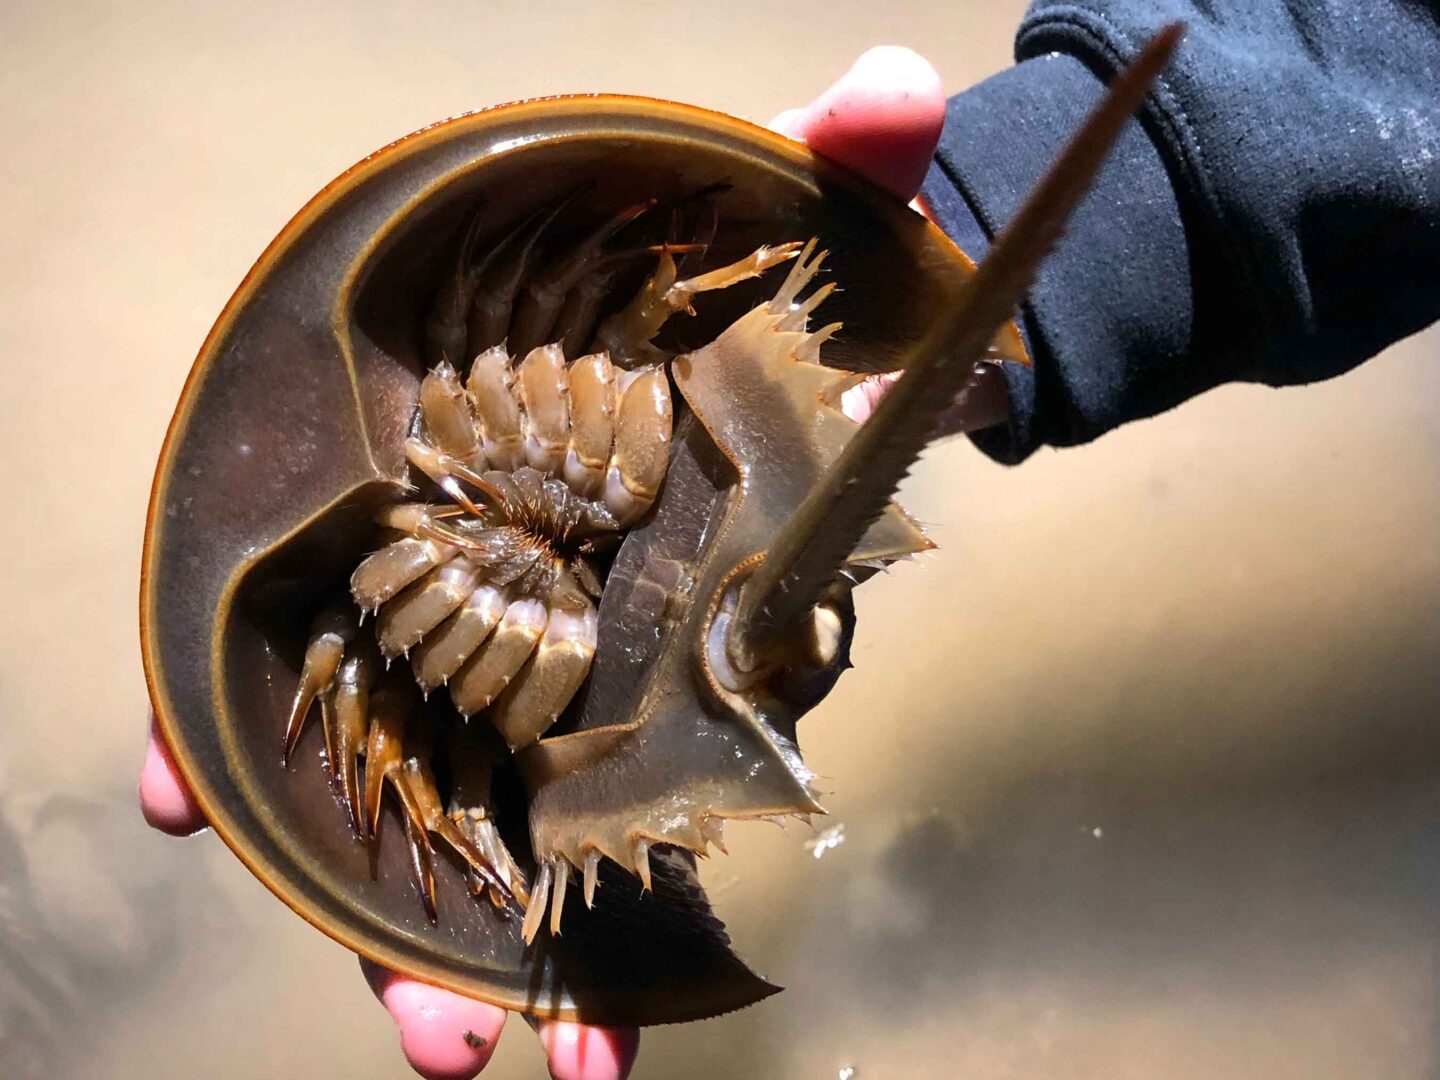 A brown horseshoe crab with a long pointed tail and a half-circle body